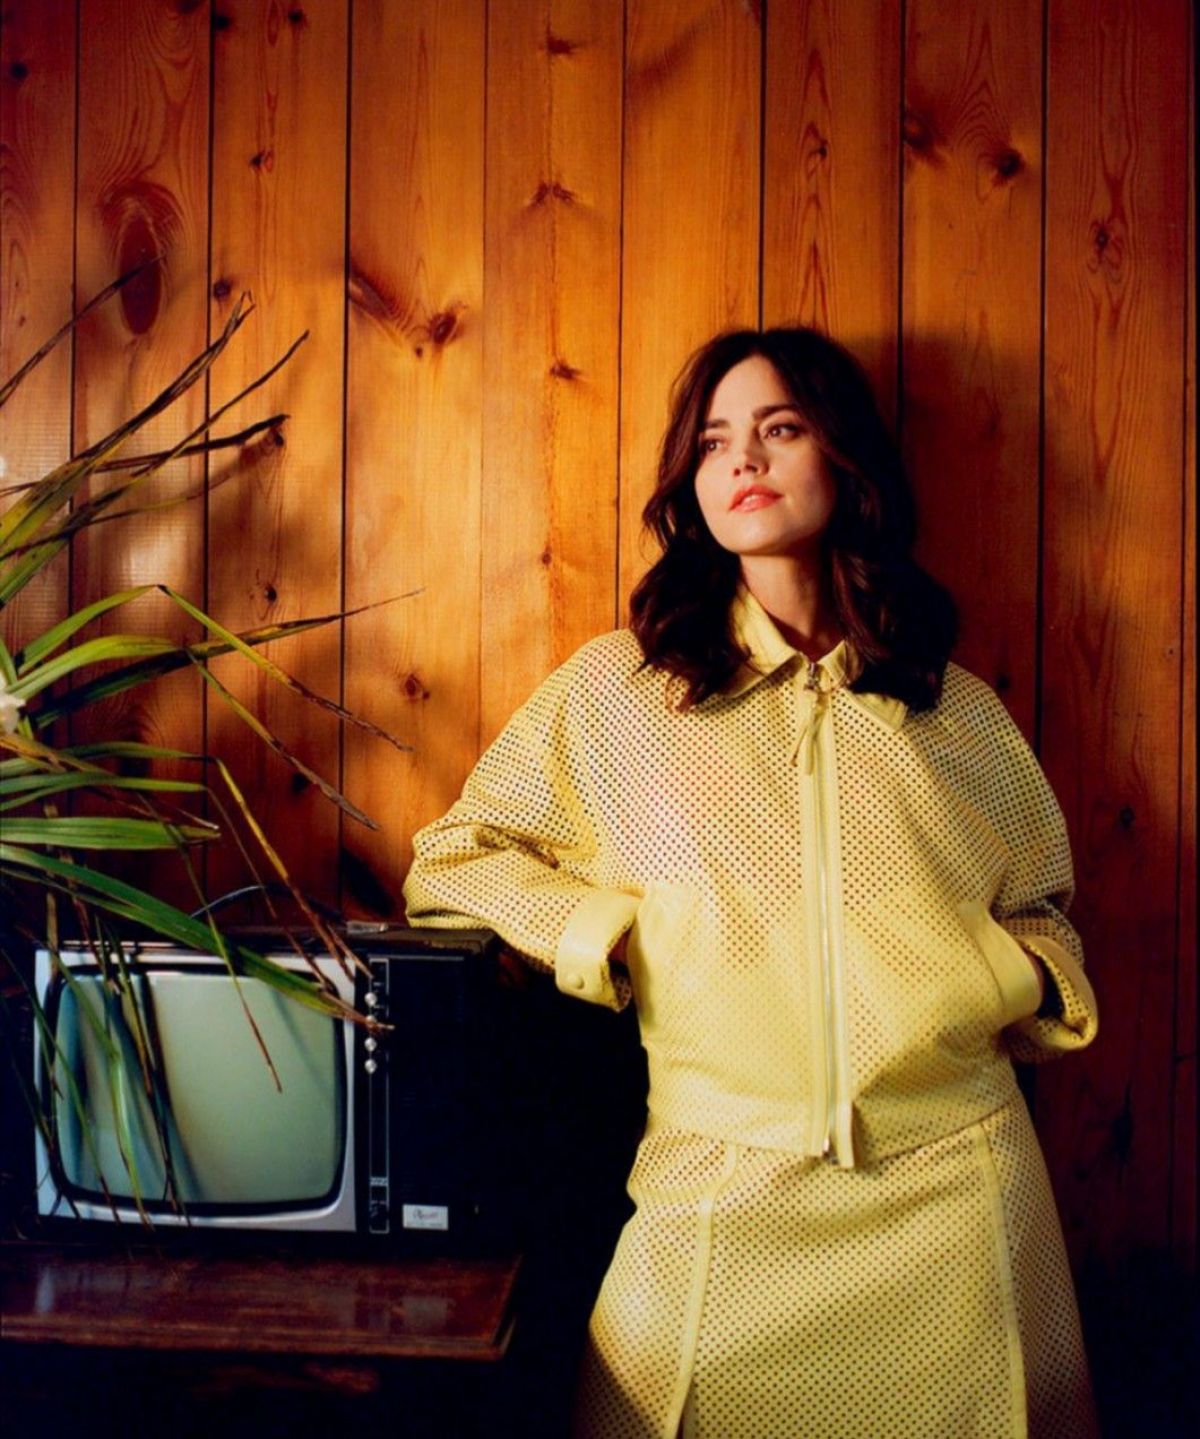 jenna-louise-coleman-for-laterals-magazine-summer-2021-2.jpg